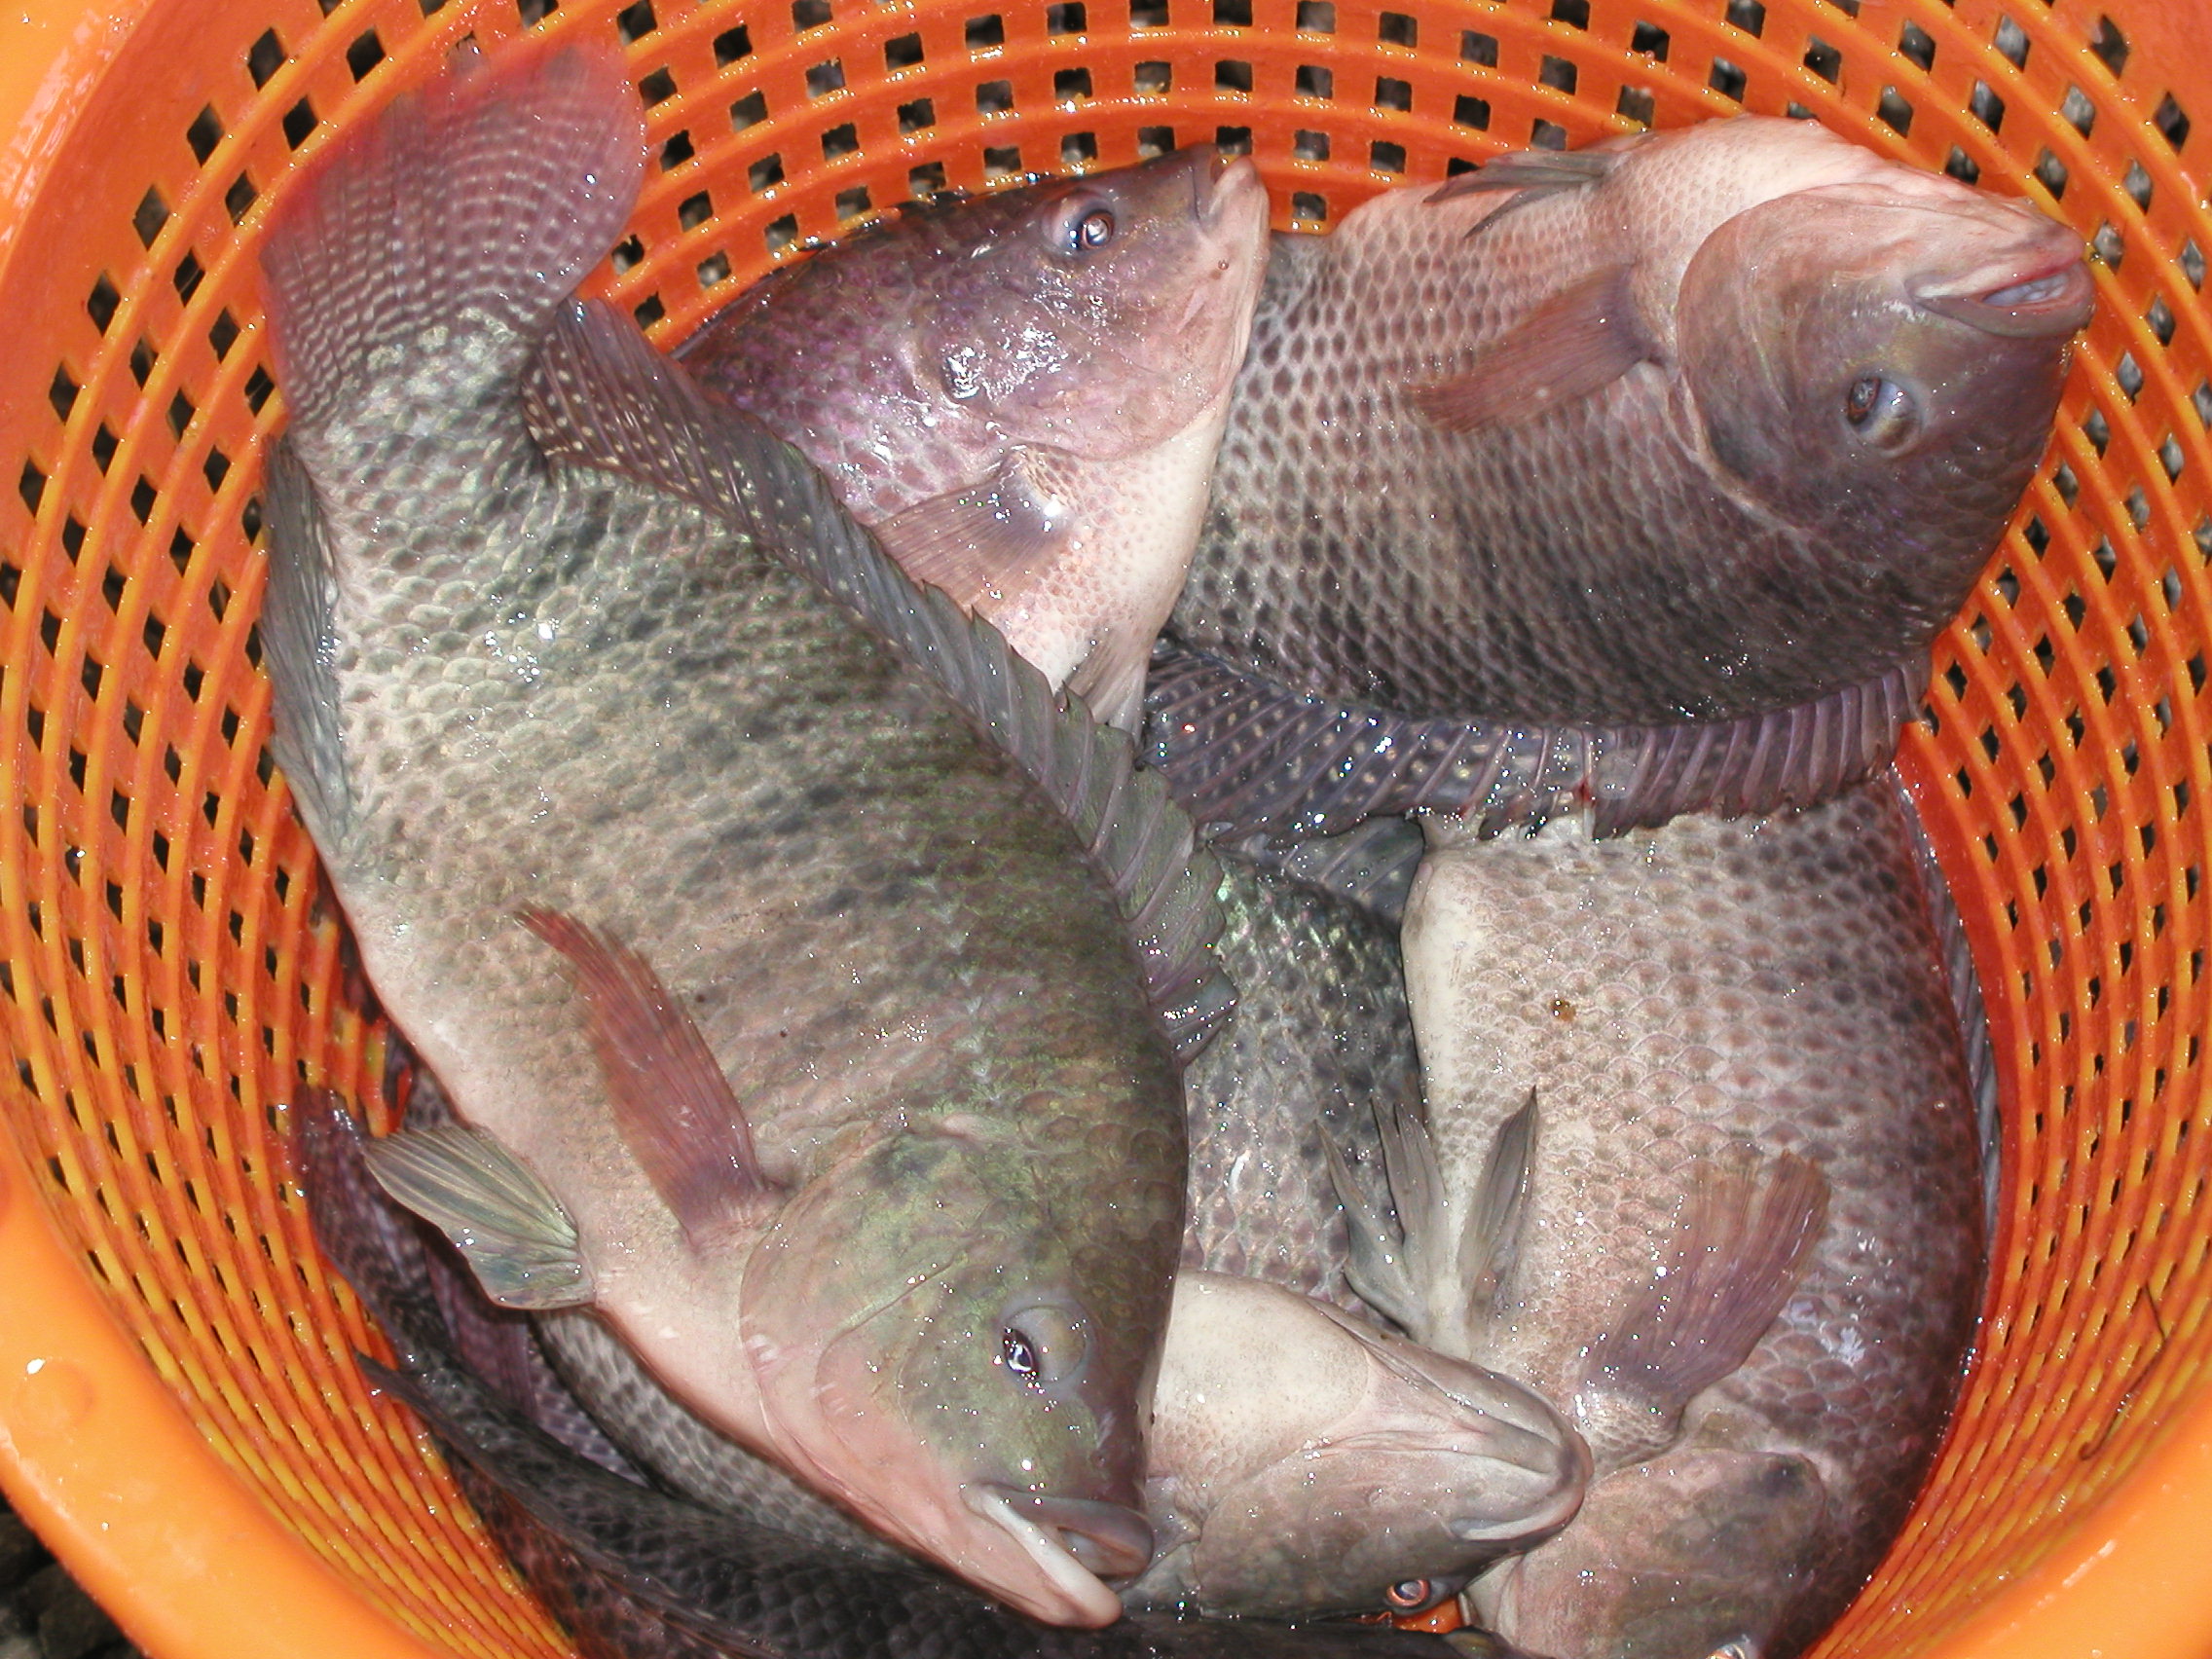 CAS tilapia harvested from the system